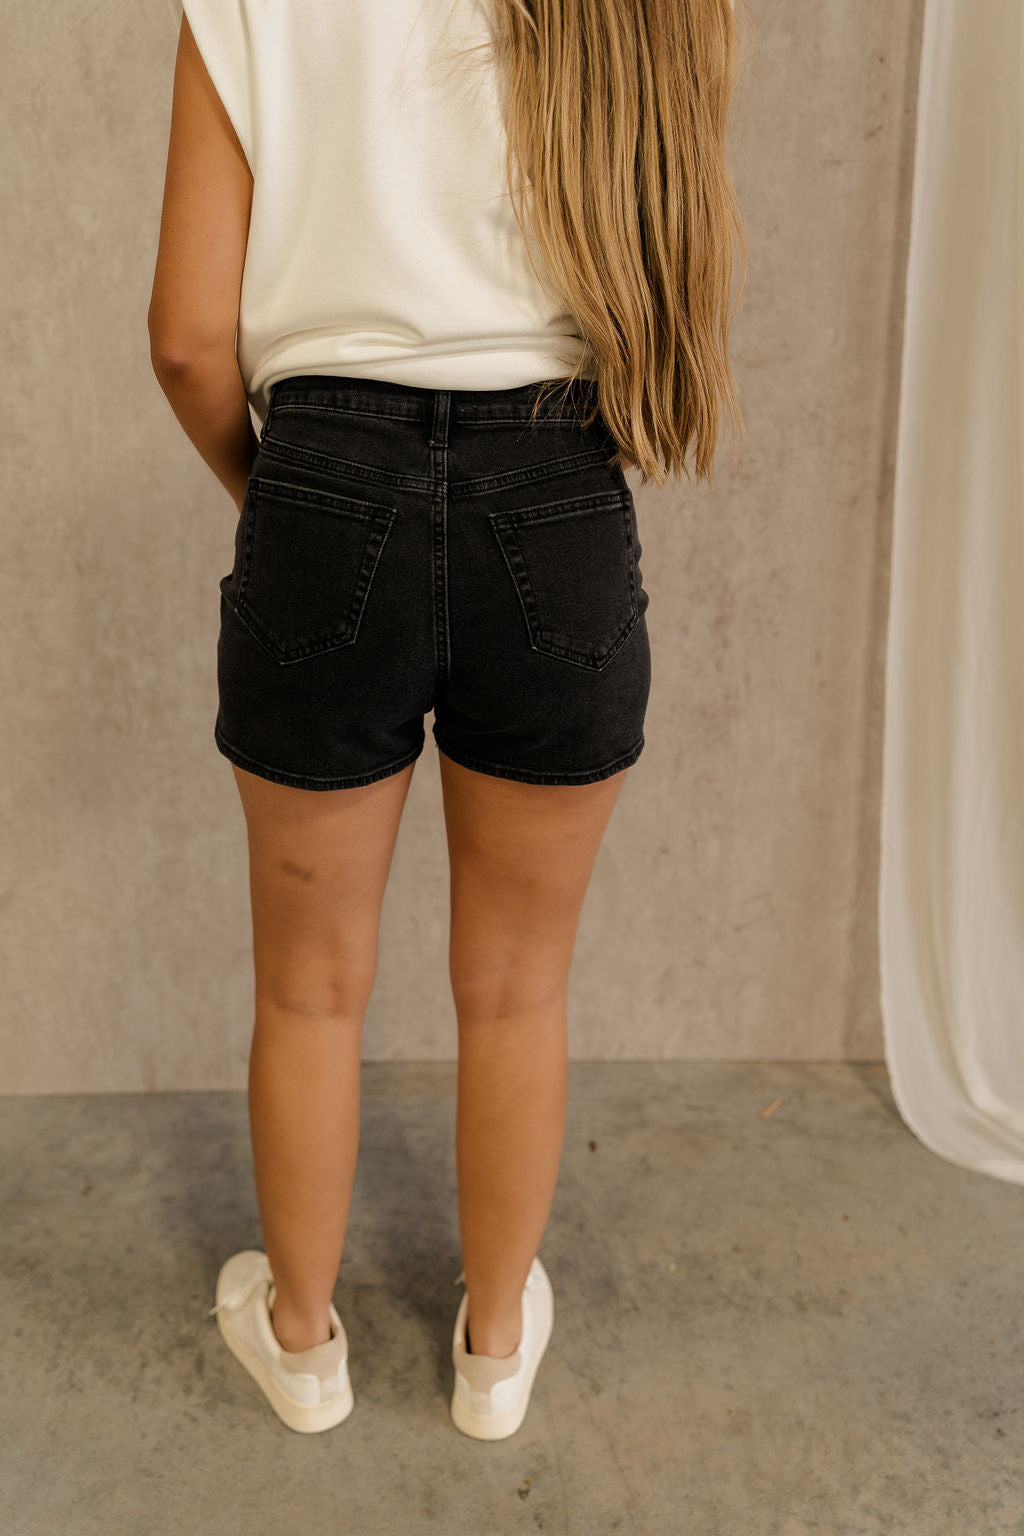 Back view of female model wearing the Ava Washed Black Denim Shorts which features Washed Black Denim Fabric, Two Front Pockets, Two Back Pockets, Silver Button with Zipper Closure and Belt Loops